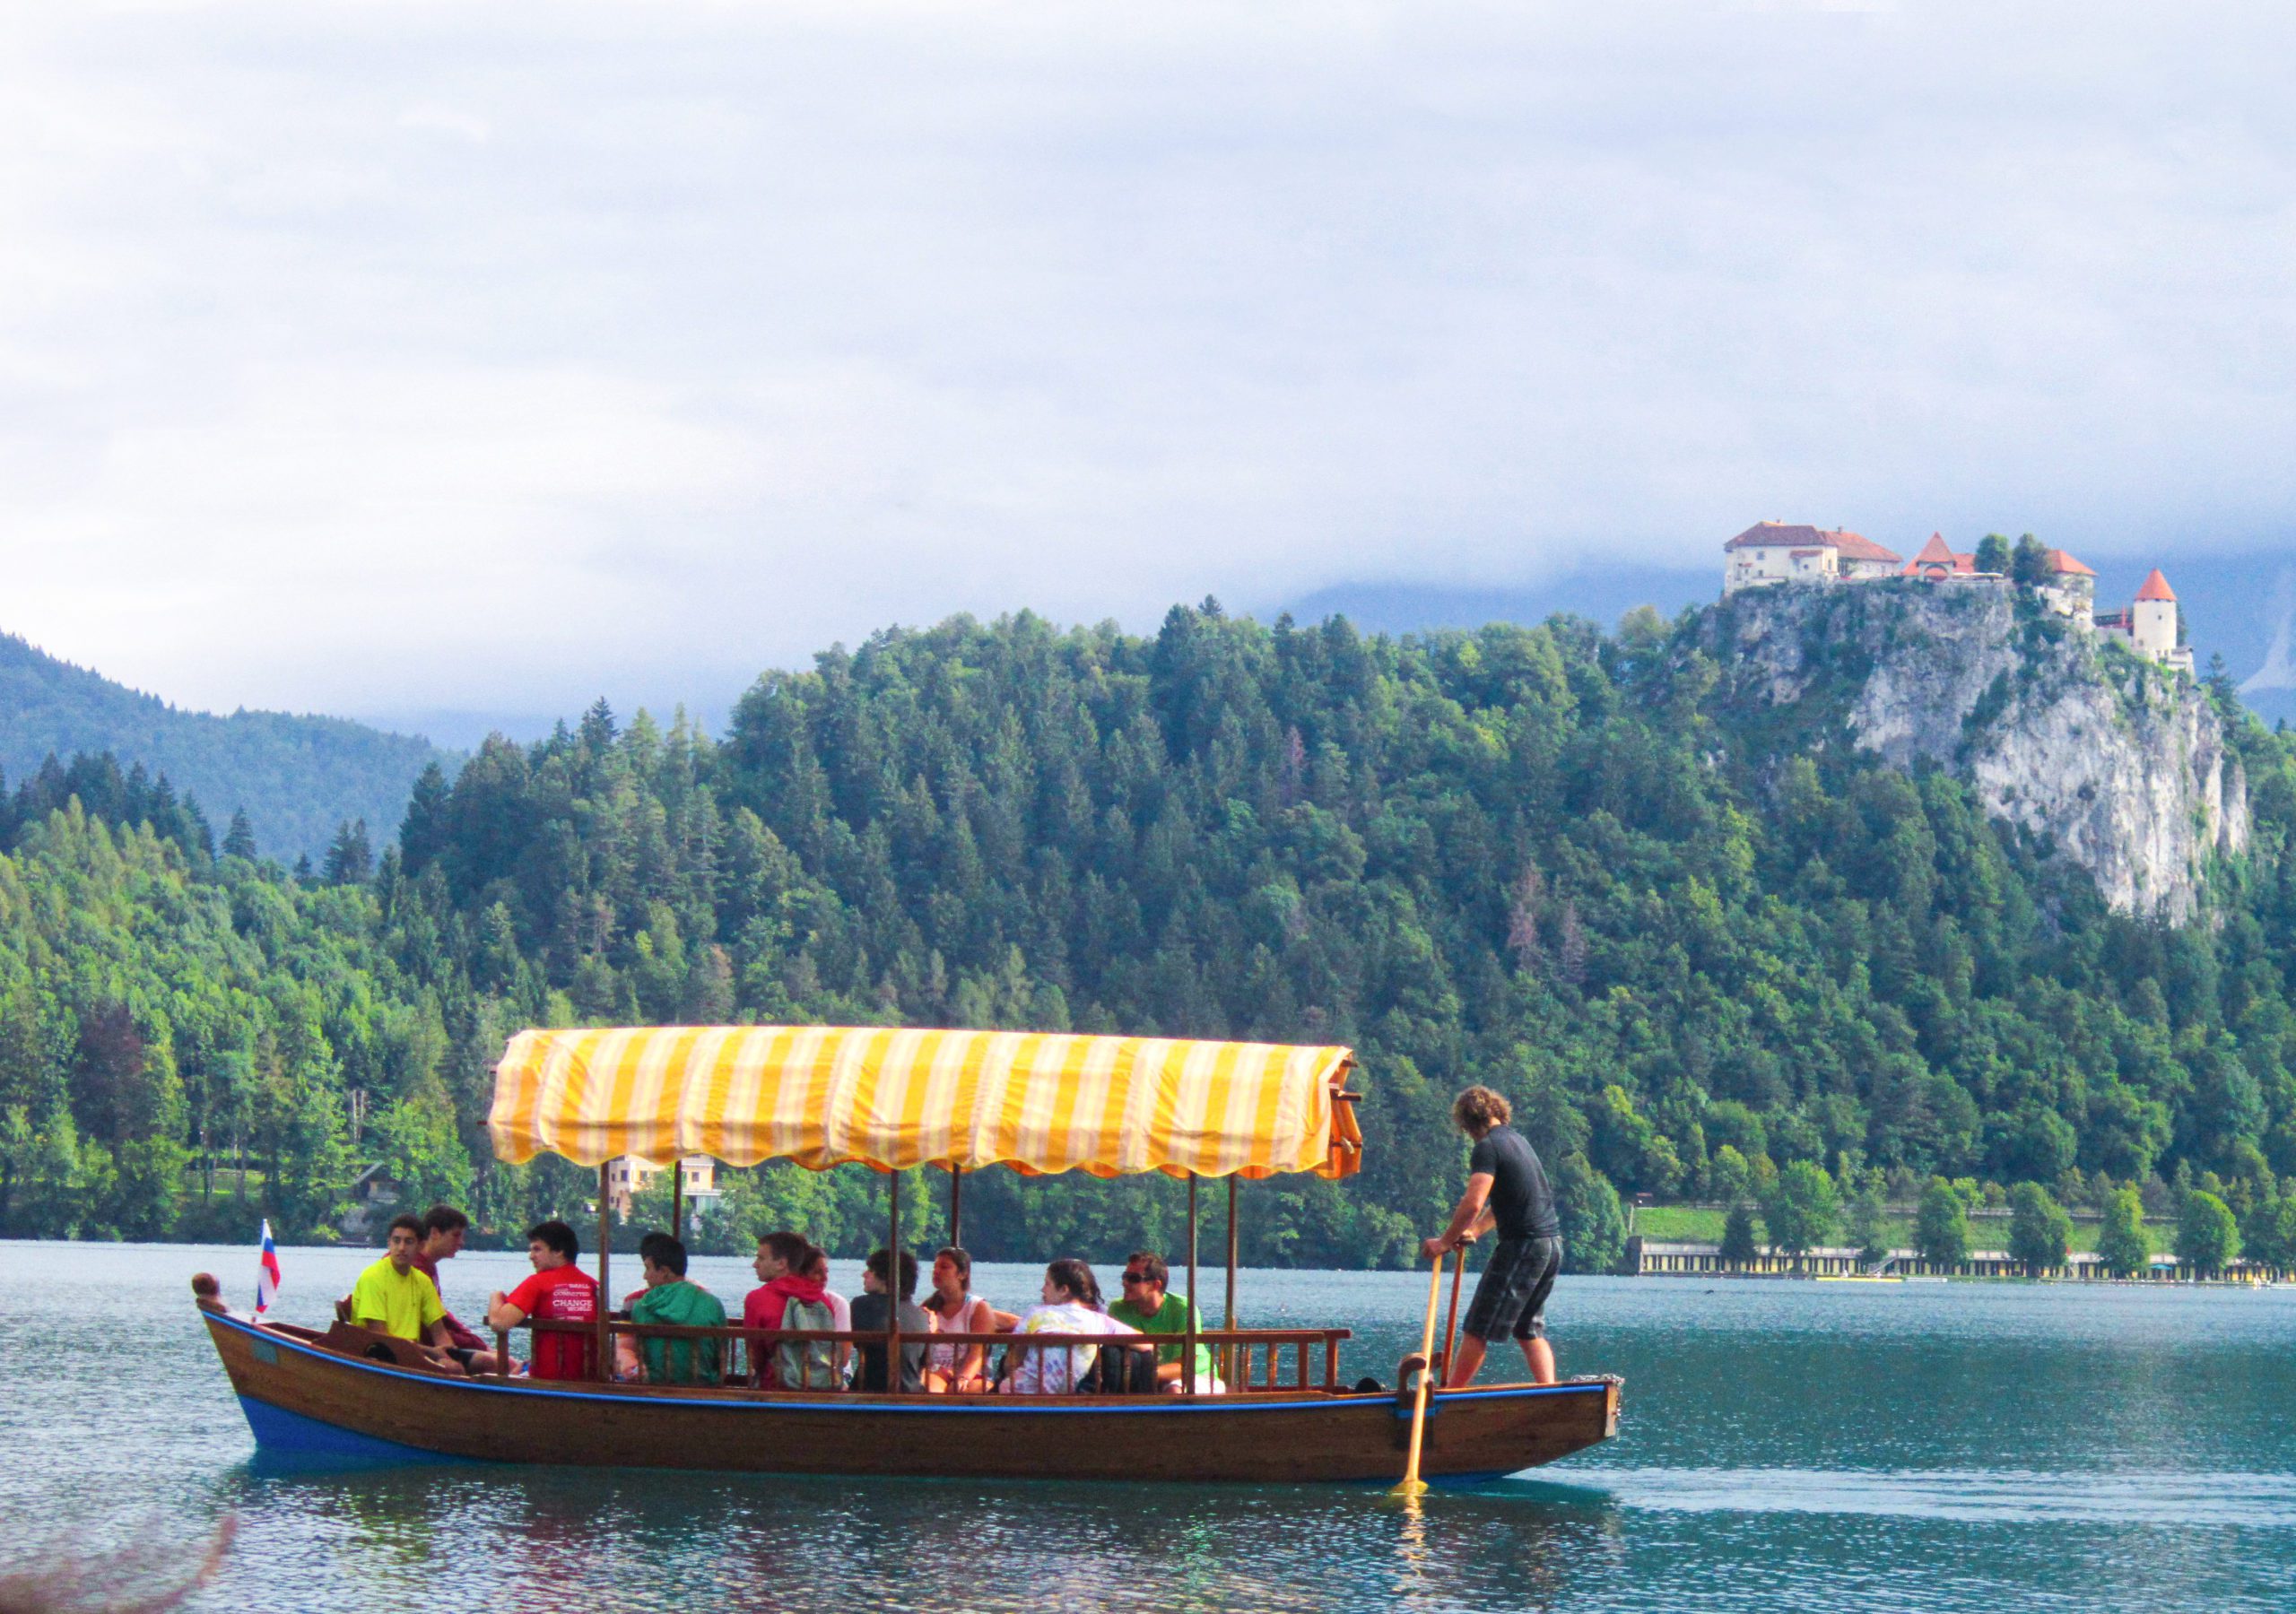 People riding a boat near the mountains